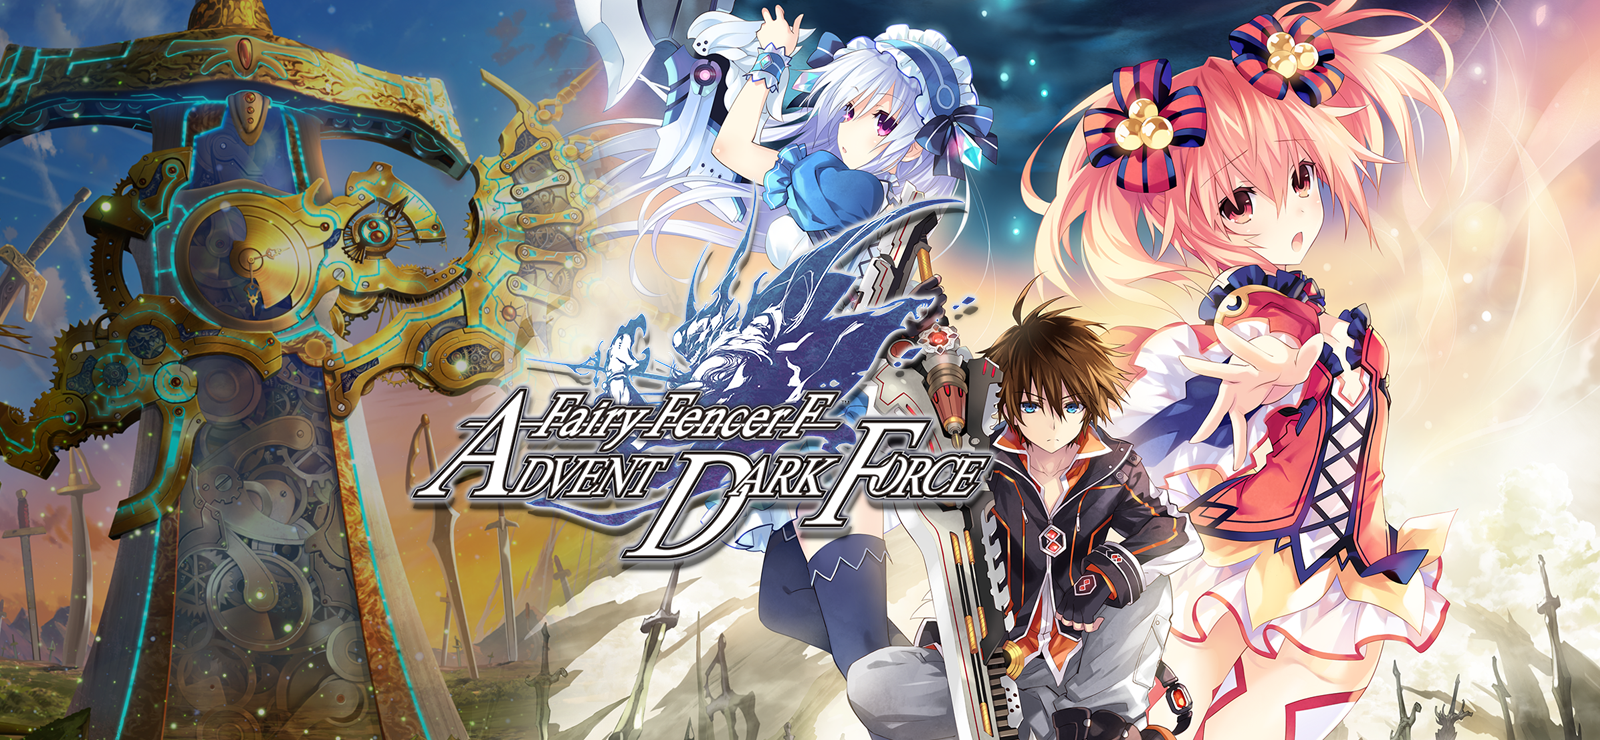 Fairy Fencer F: Advent Dark Force Complete Deluxe Set